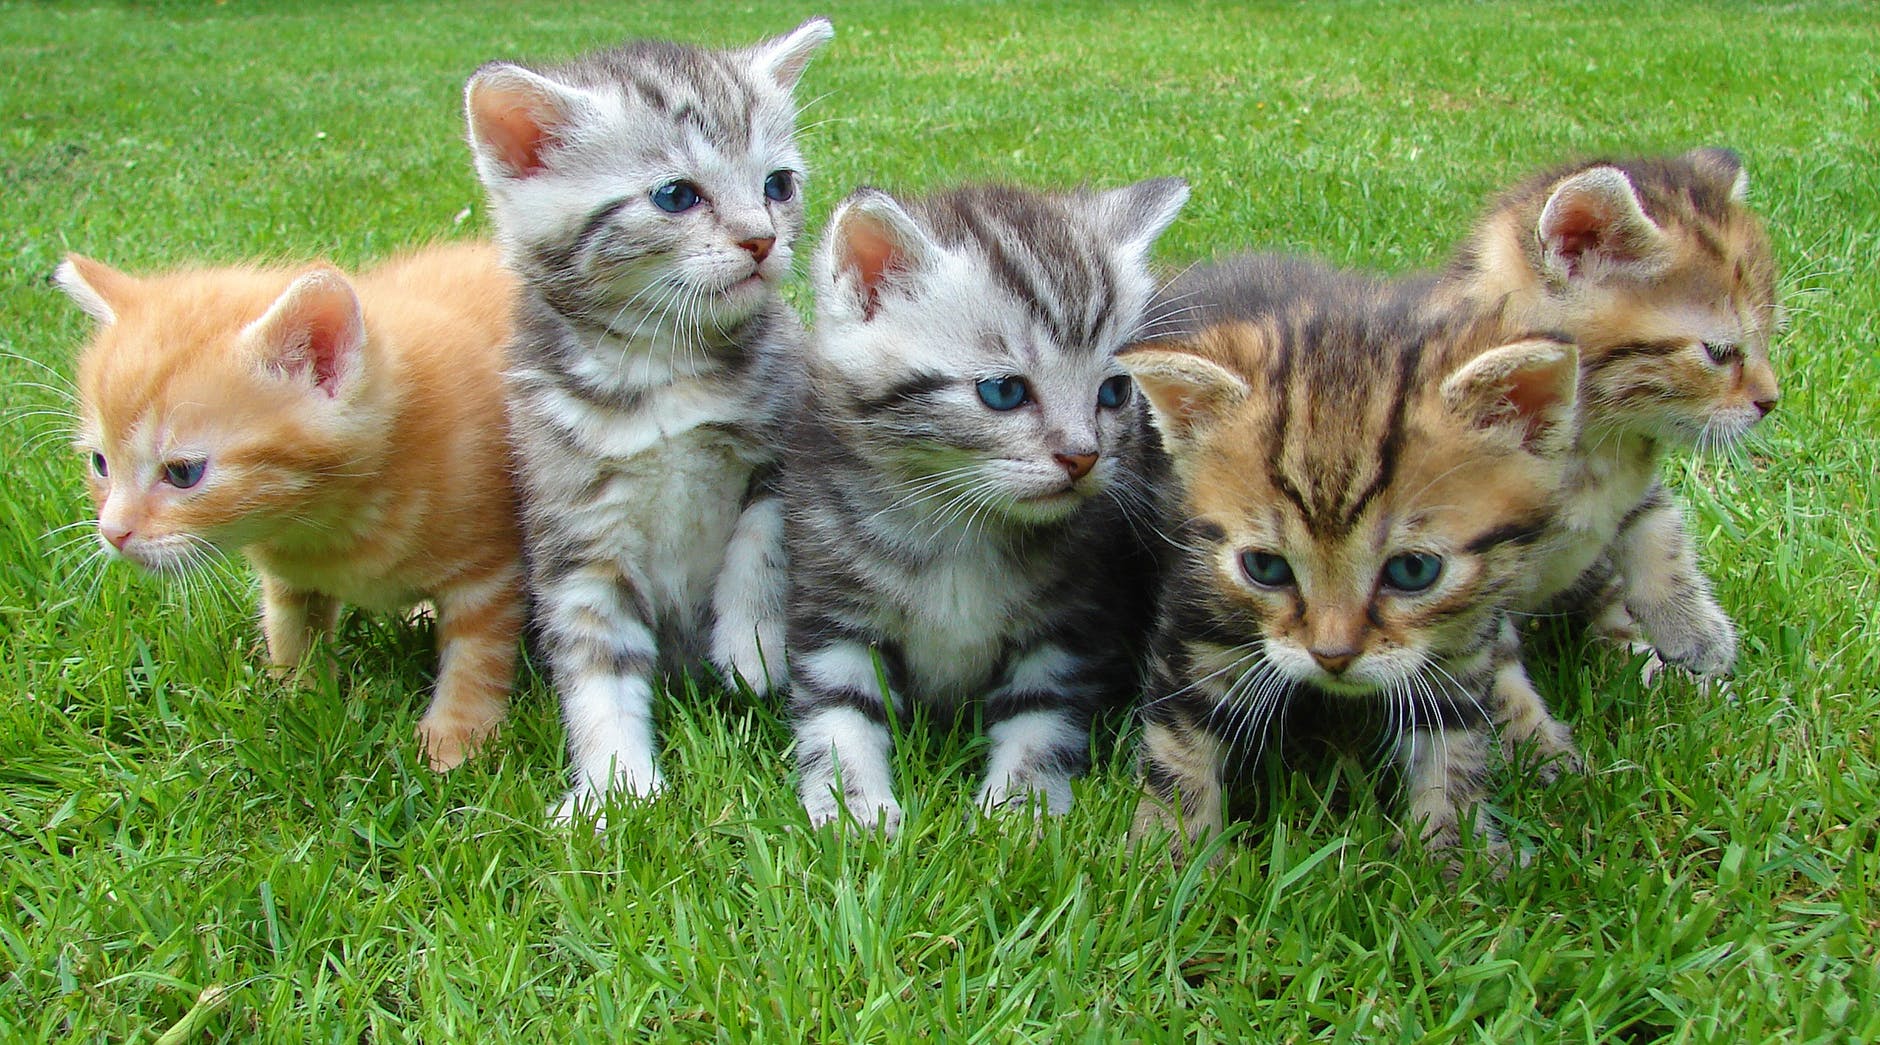 Cat facts to purr over - Cats make for fascinating pets and are loved by people for myriad reasons. Here is a list of facts about cats! #Cats #CatFacts (assorted color kittens)